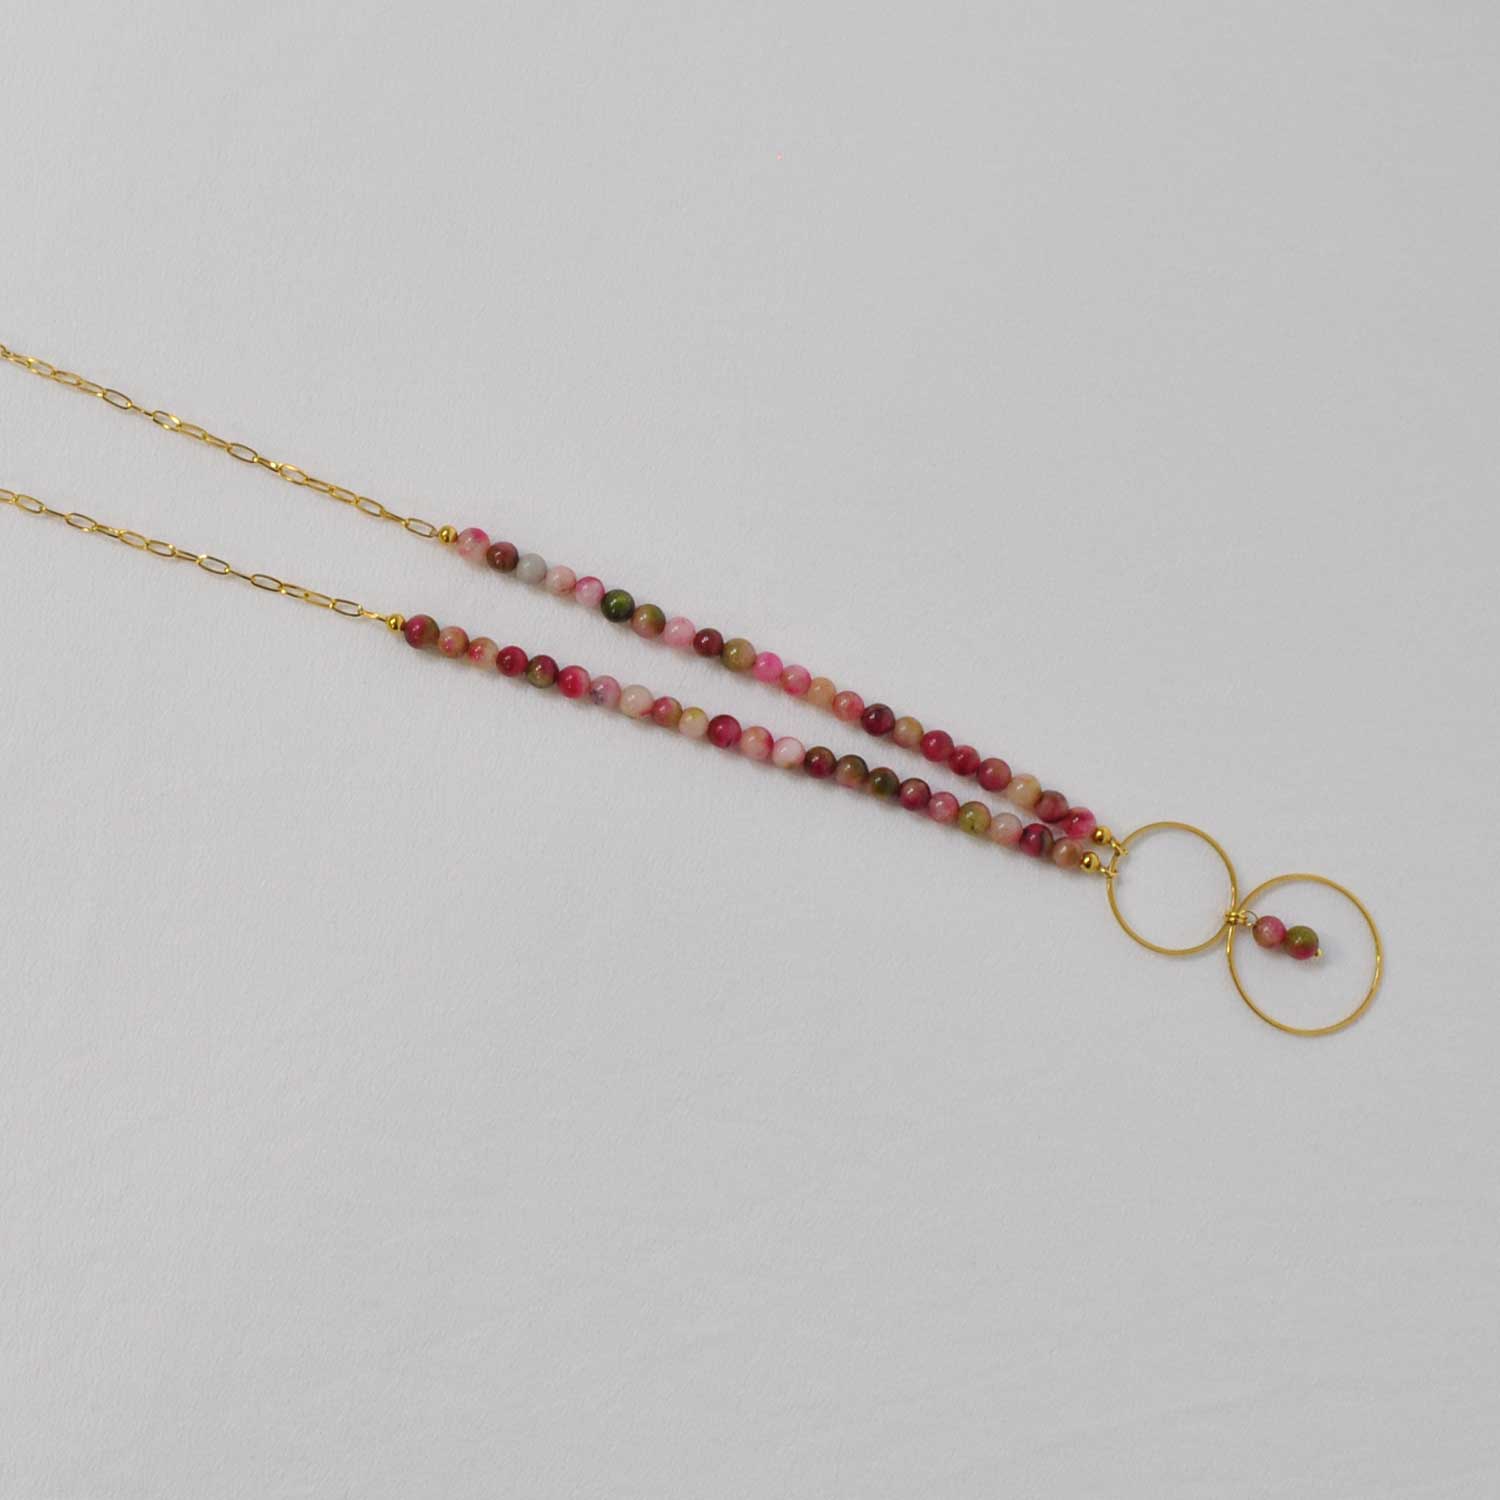 Red hoops necklace